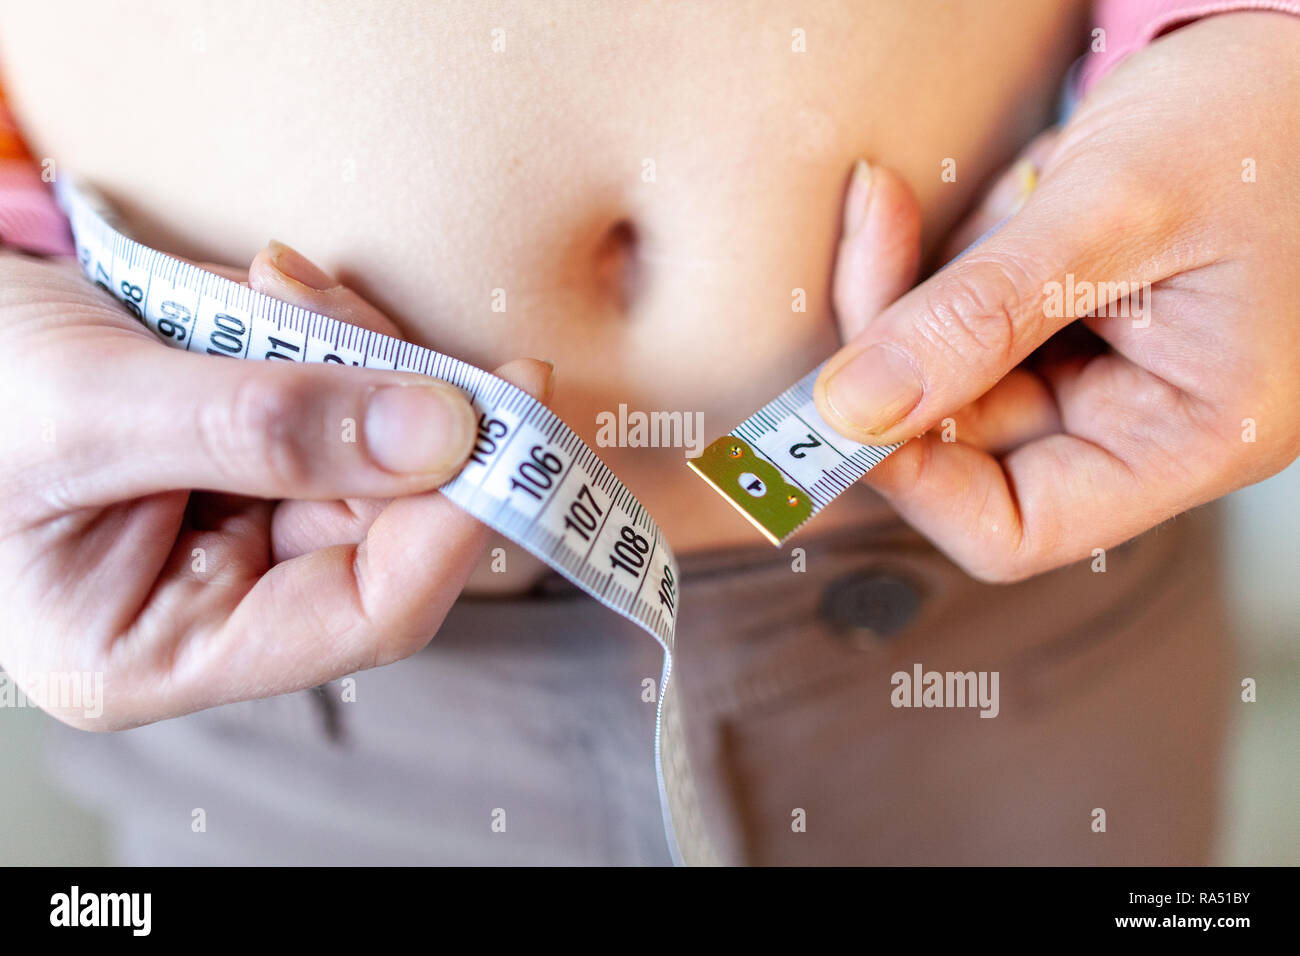 woman measures her abdomen with a measuring tape Stock Photo